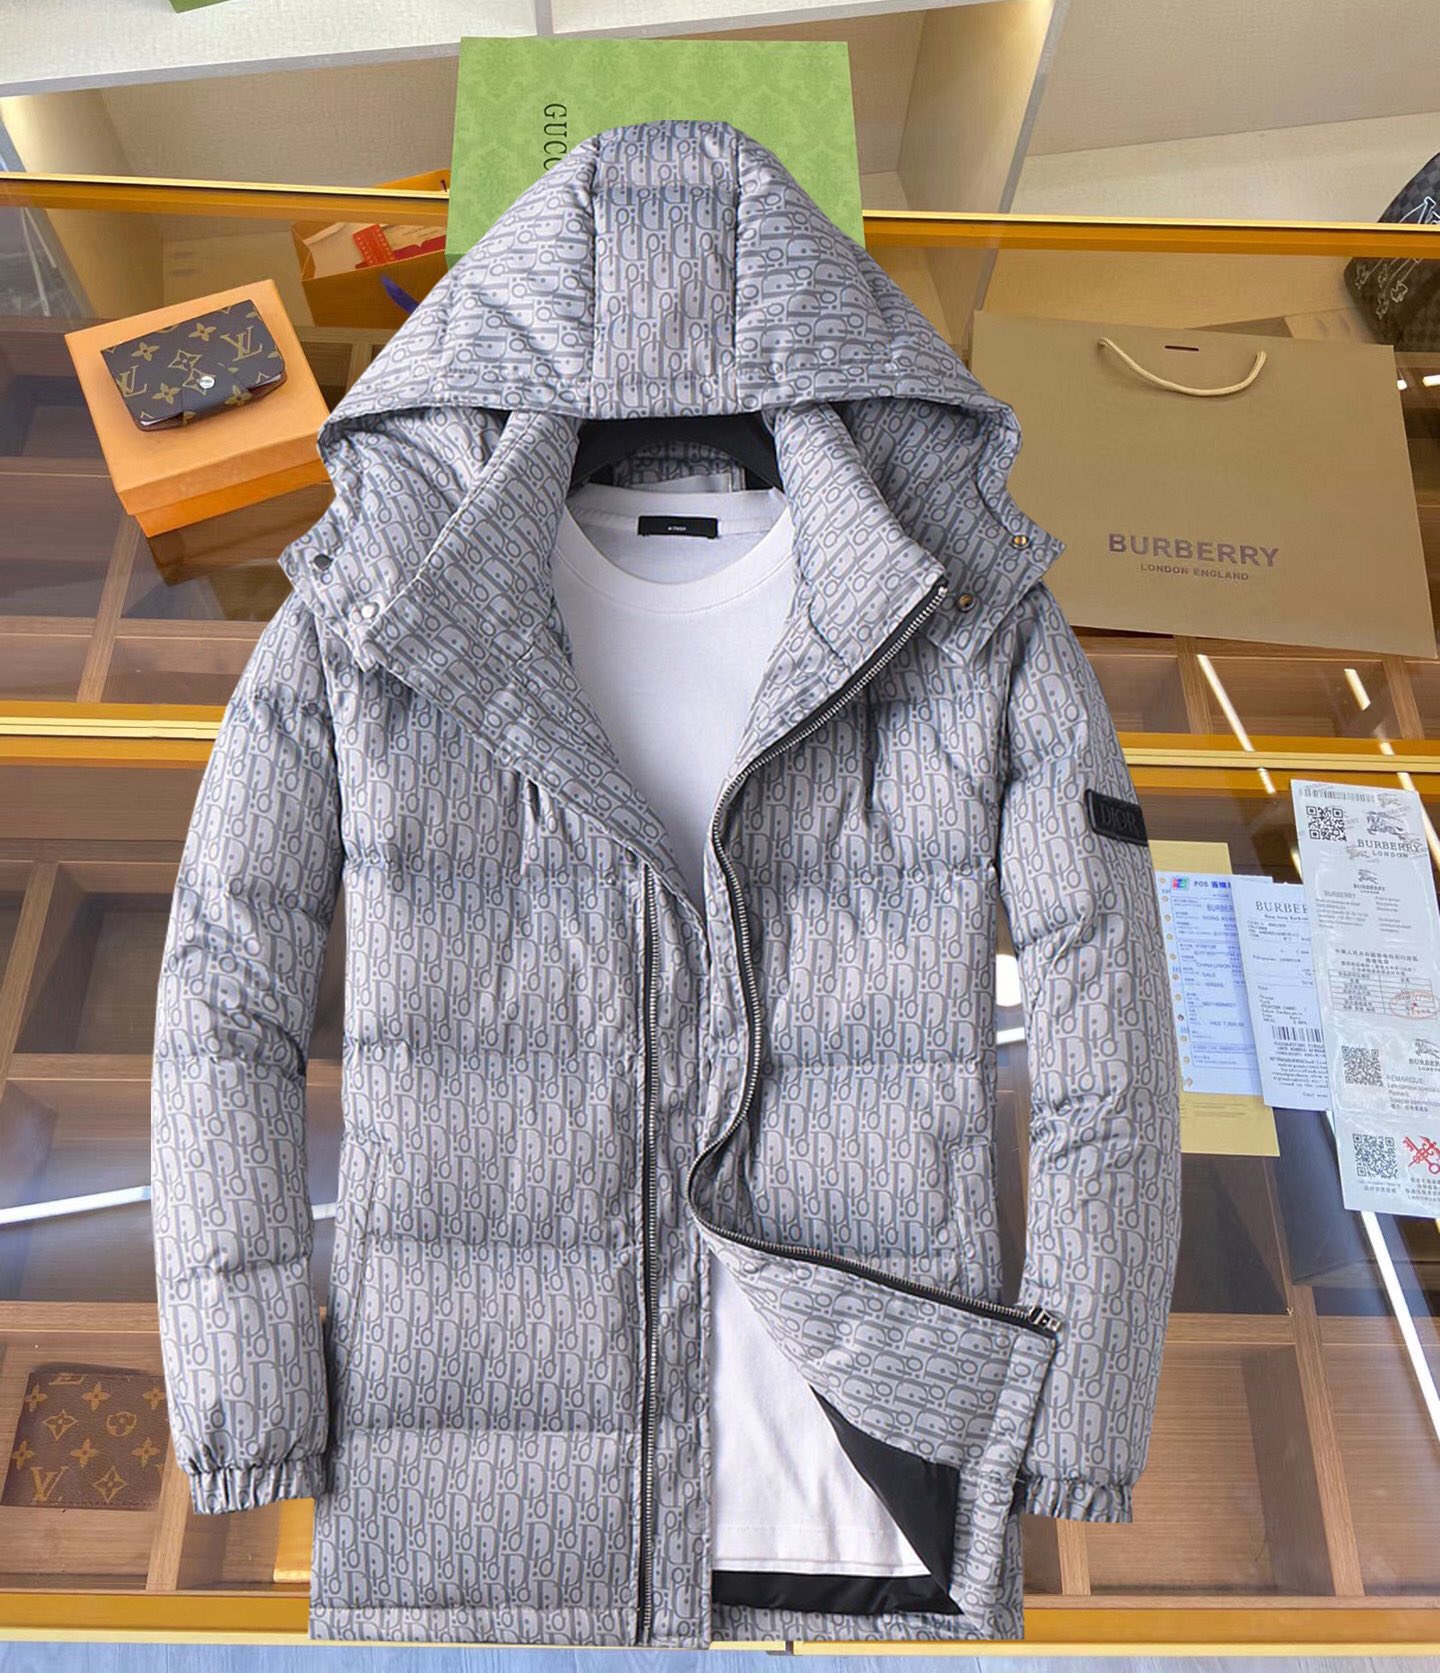 Dior Clothing Down Jacket White Duck Down Fall/Winter Collection